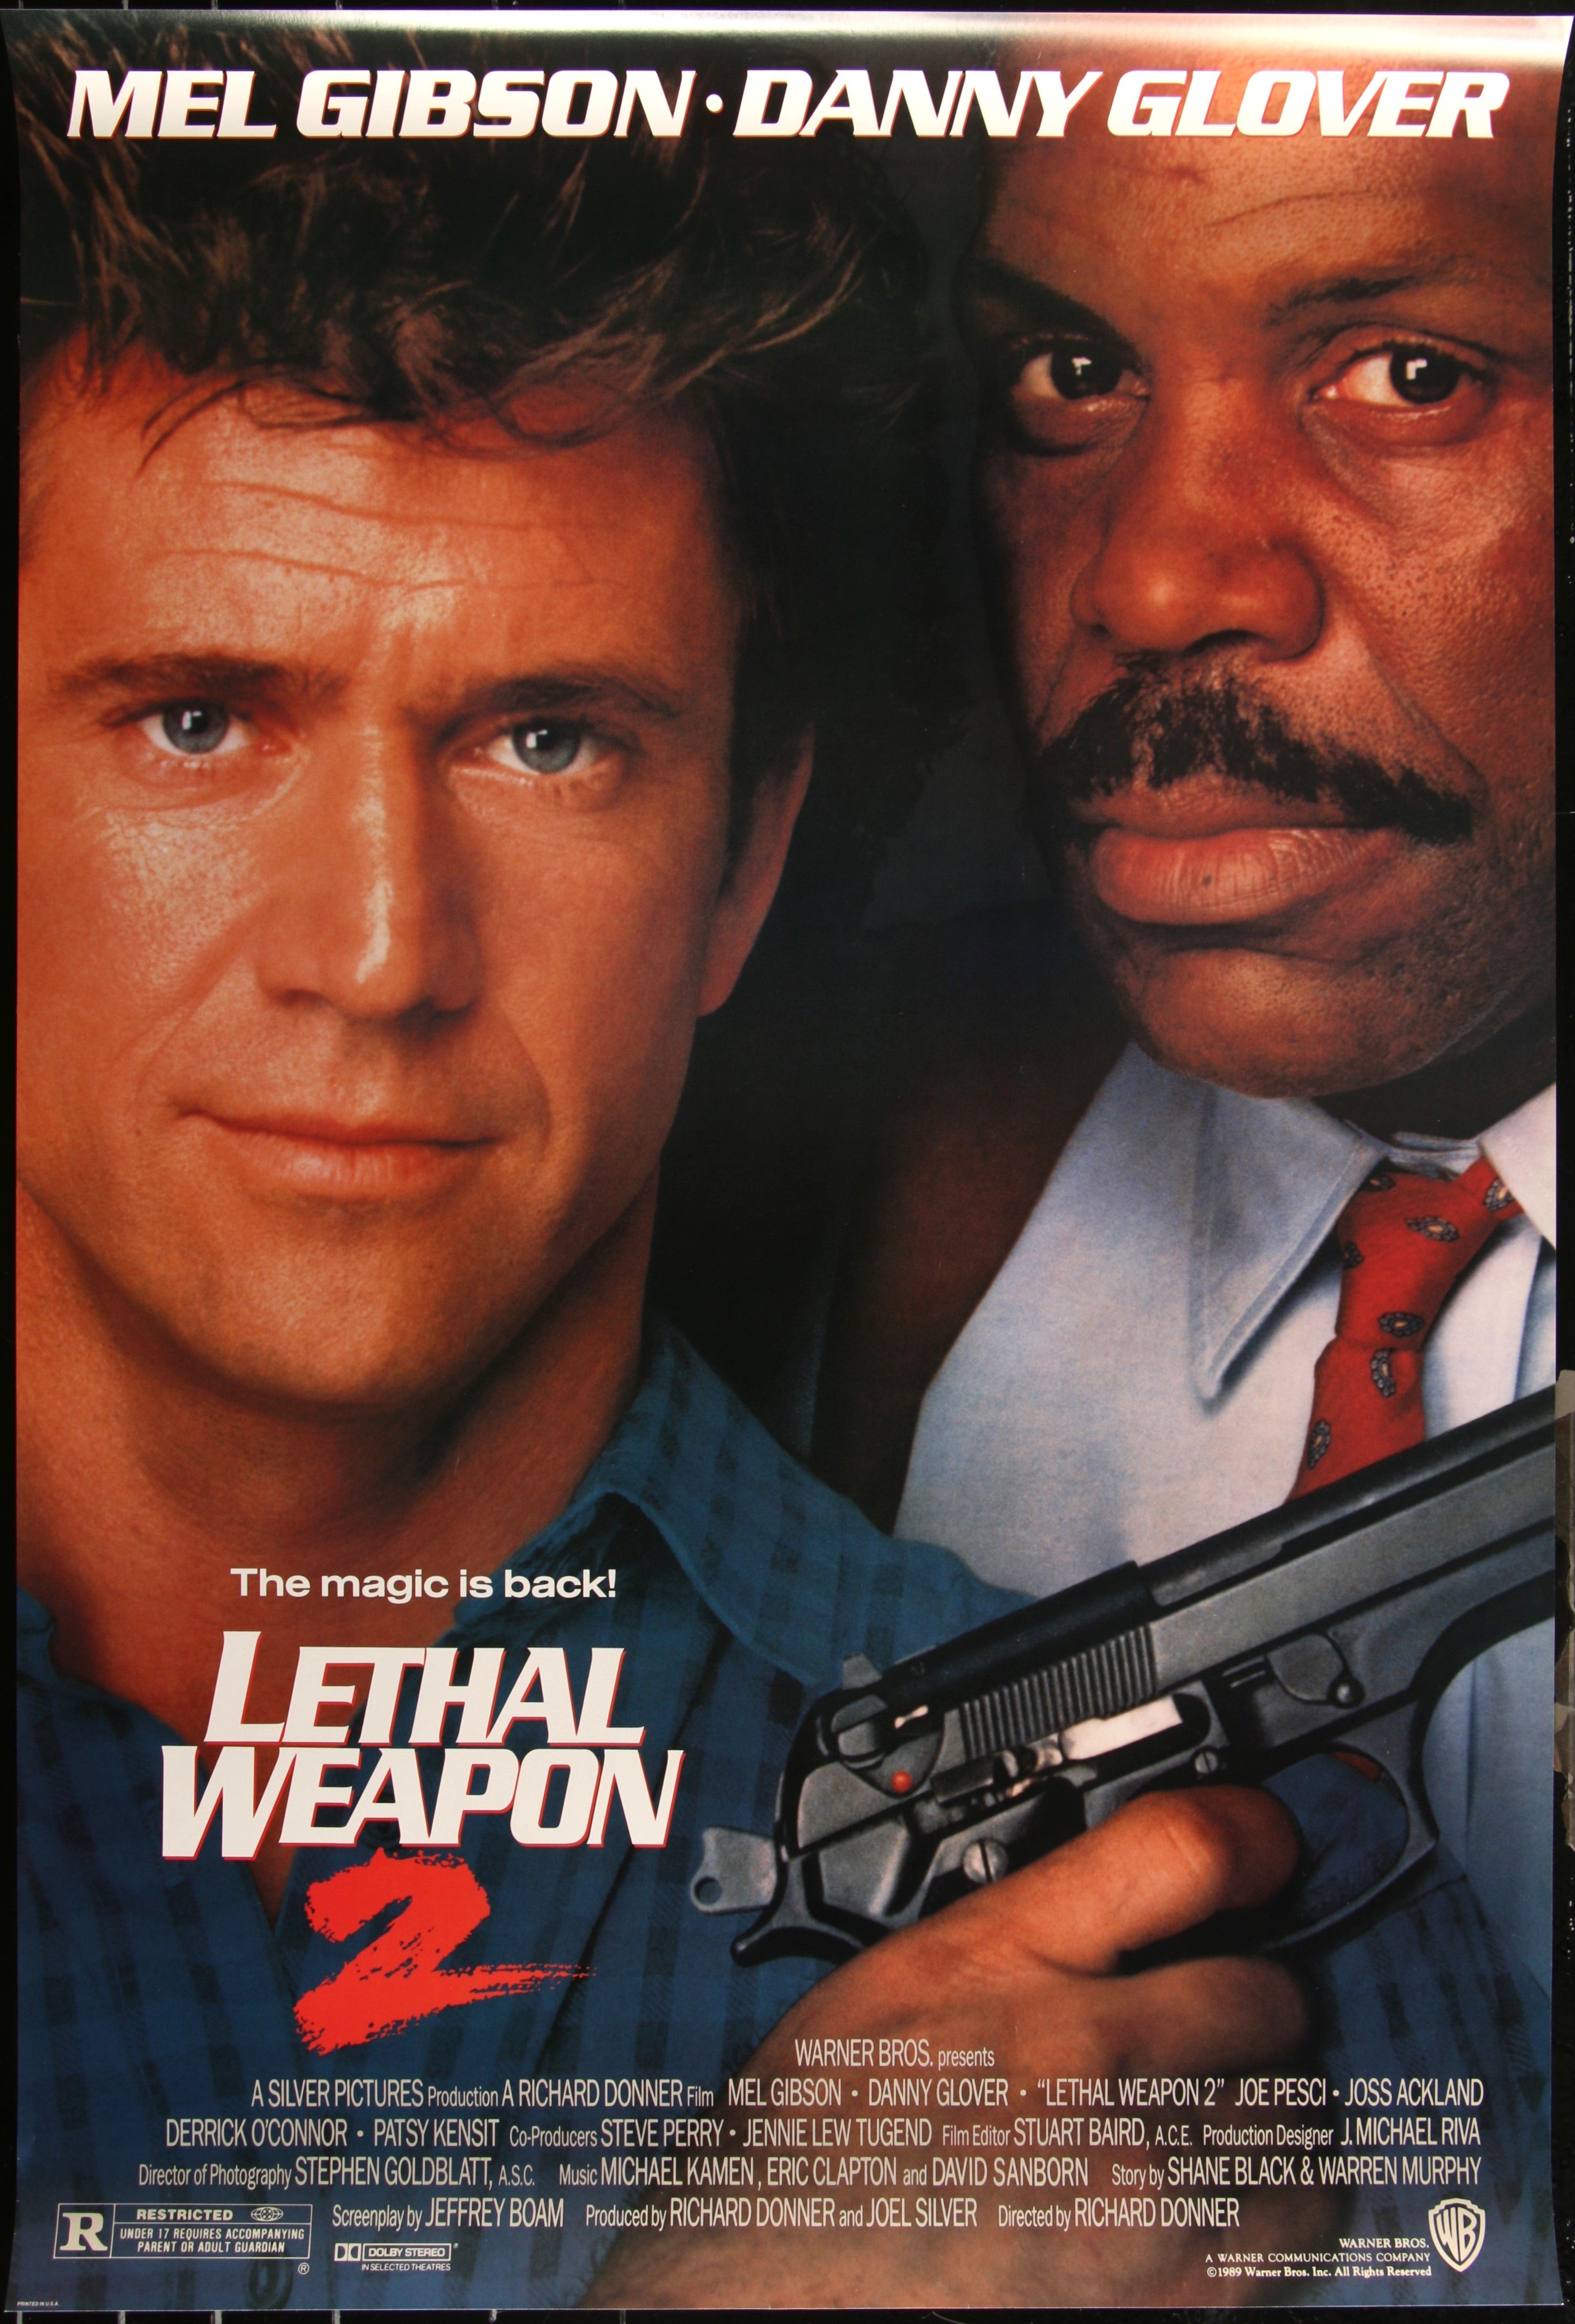 LETHAL WEAPON 2 (1989)